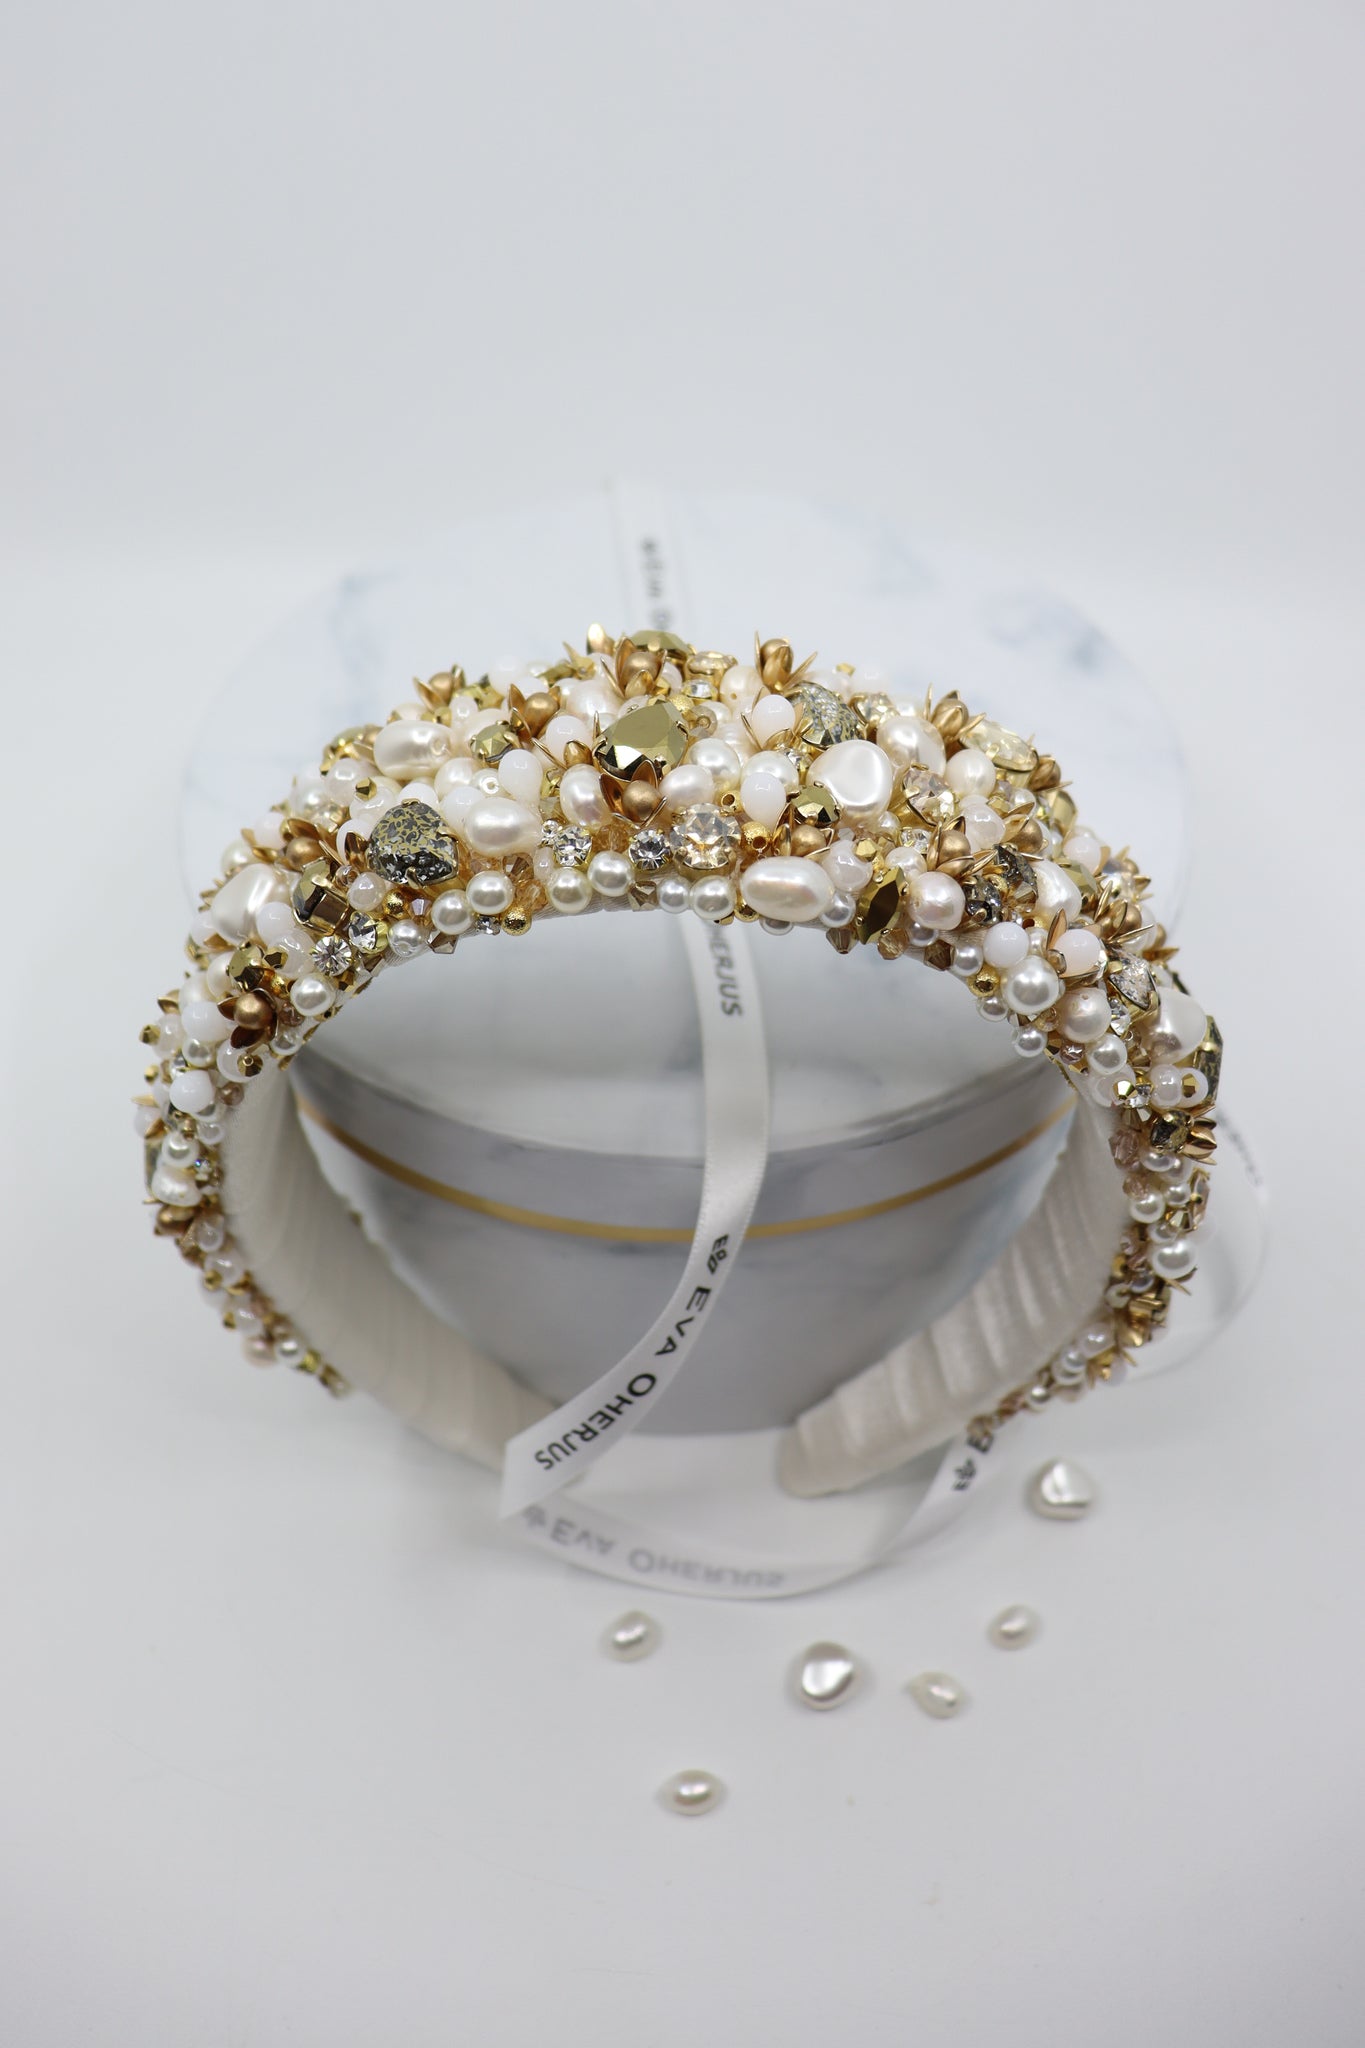 Grace Couture Head Crown - Opulent ivory silk adorned with Swarovski crystals, pearls, and radiant beads. Handcrafted elegance for an unforgettable bridal look.